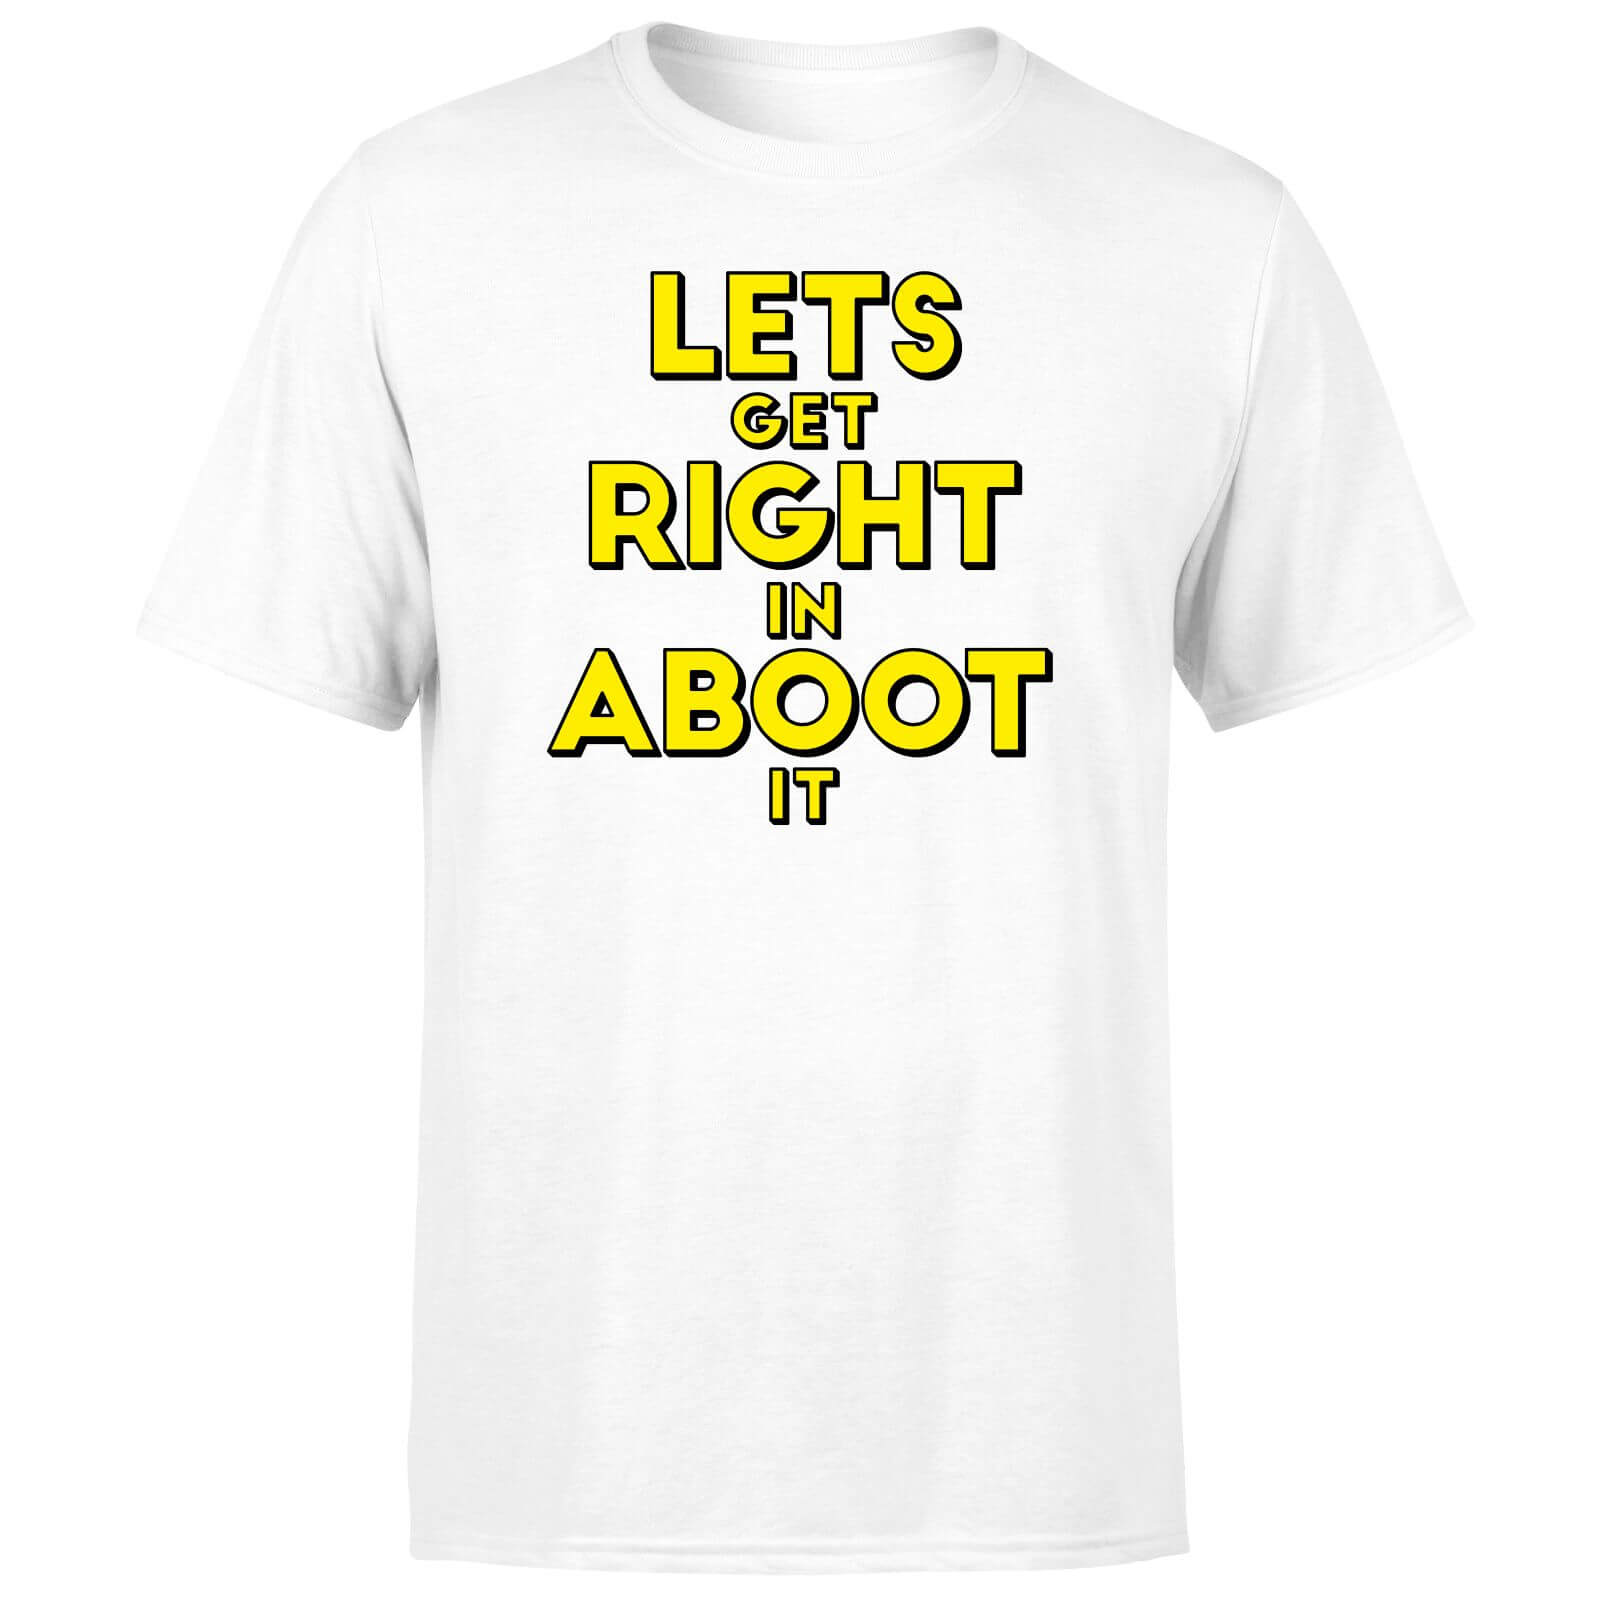 Let's Get Right In Aboot It Men's T-Shirt - White - 3XL - White